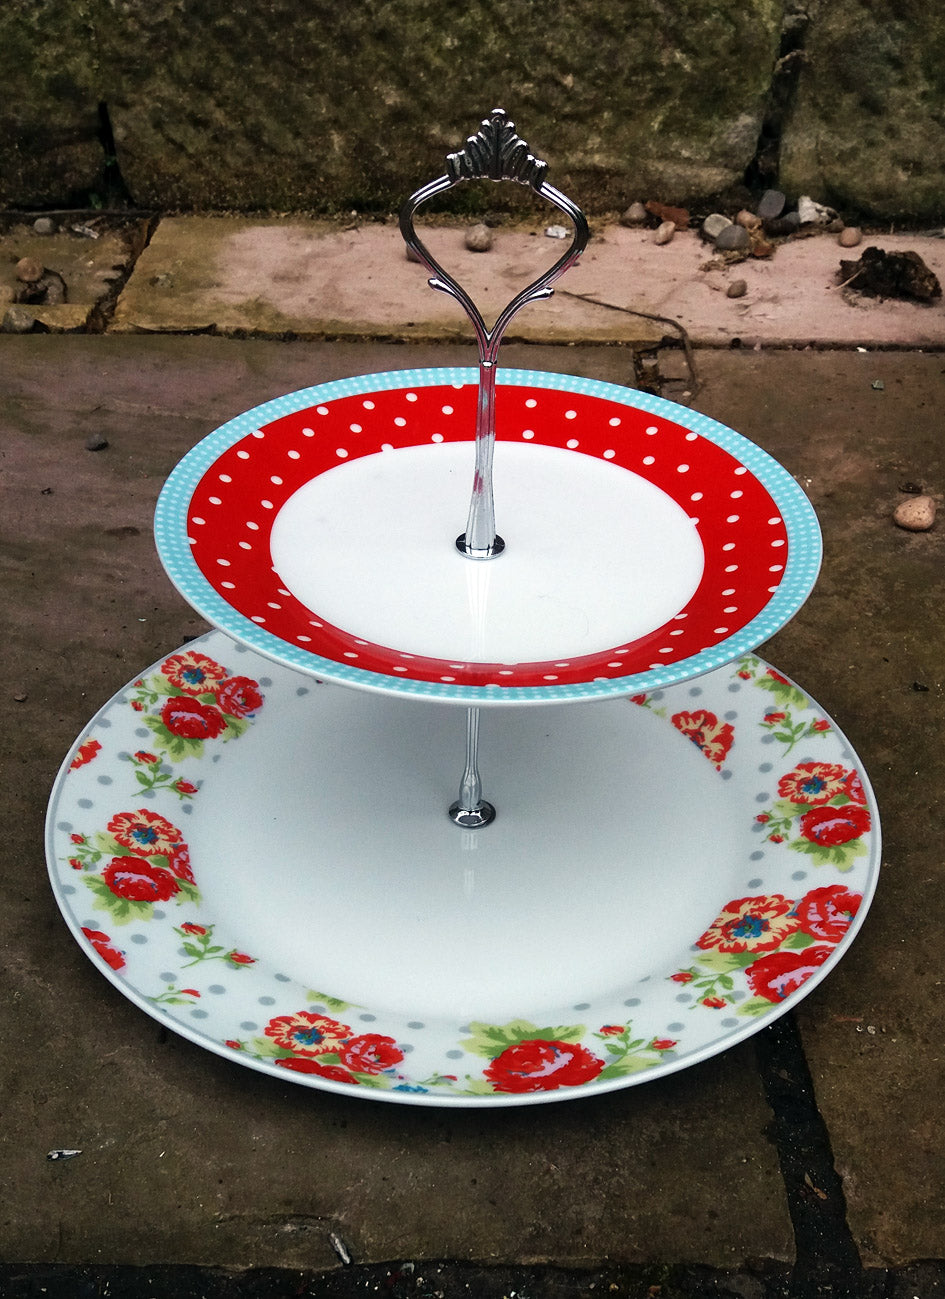 Vintage style cake stand